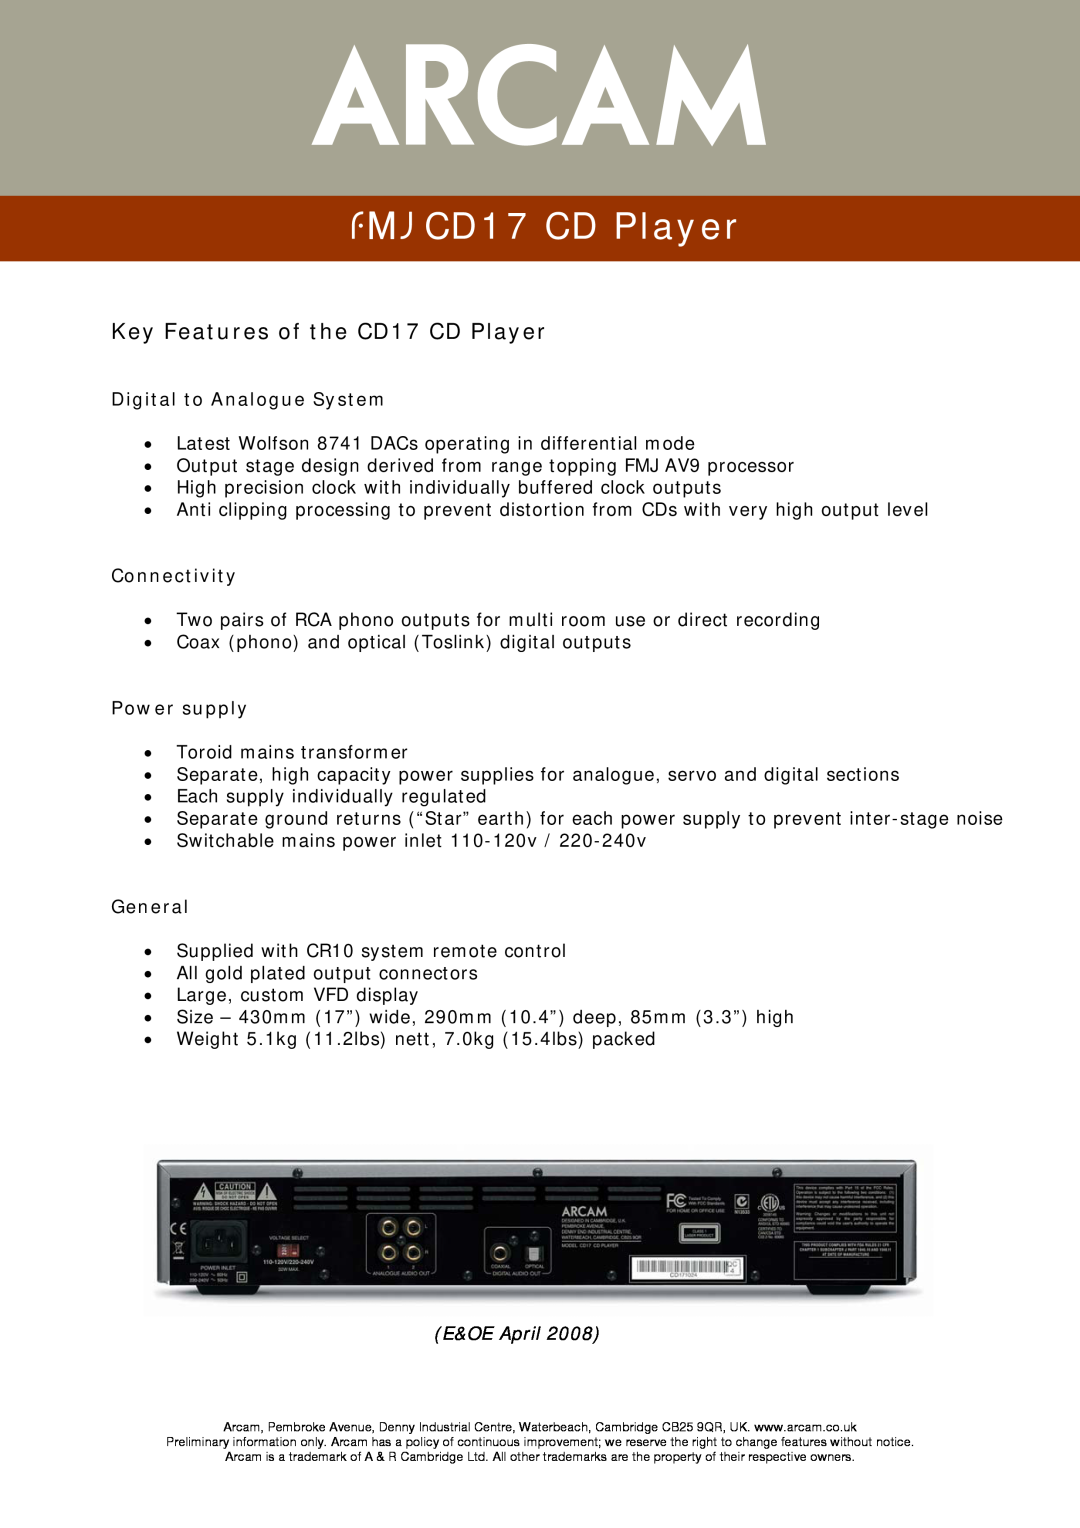 Arcam FMJ CD17 Key Features of the CD17 CD Player, Digital to Analogue System, Connectivity, Power supply, General, 23425 